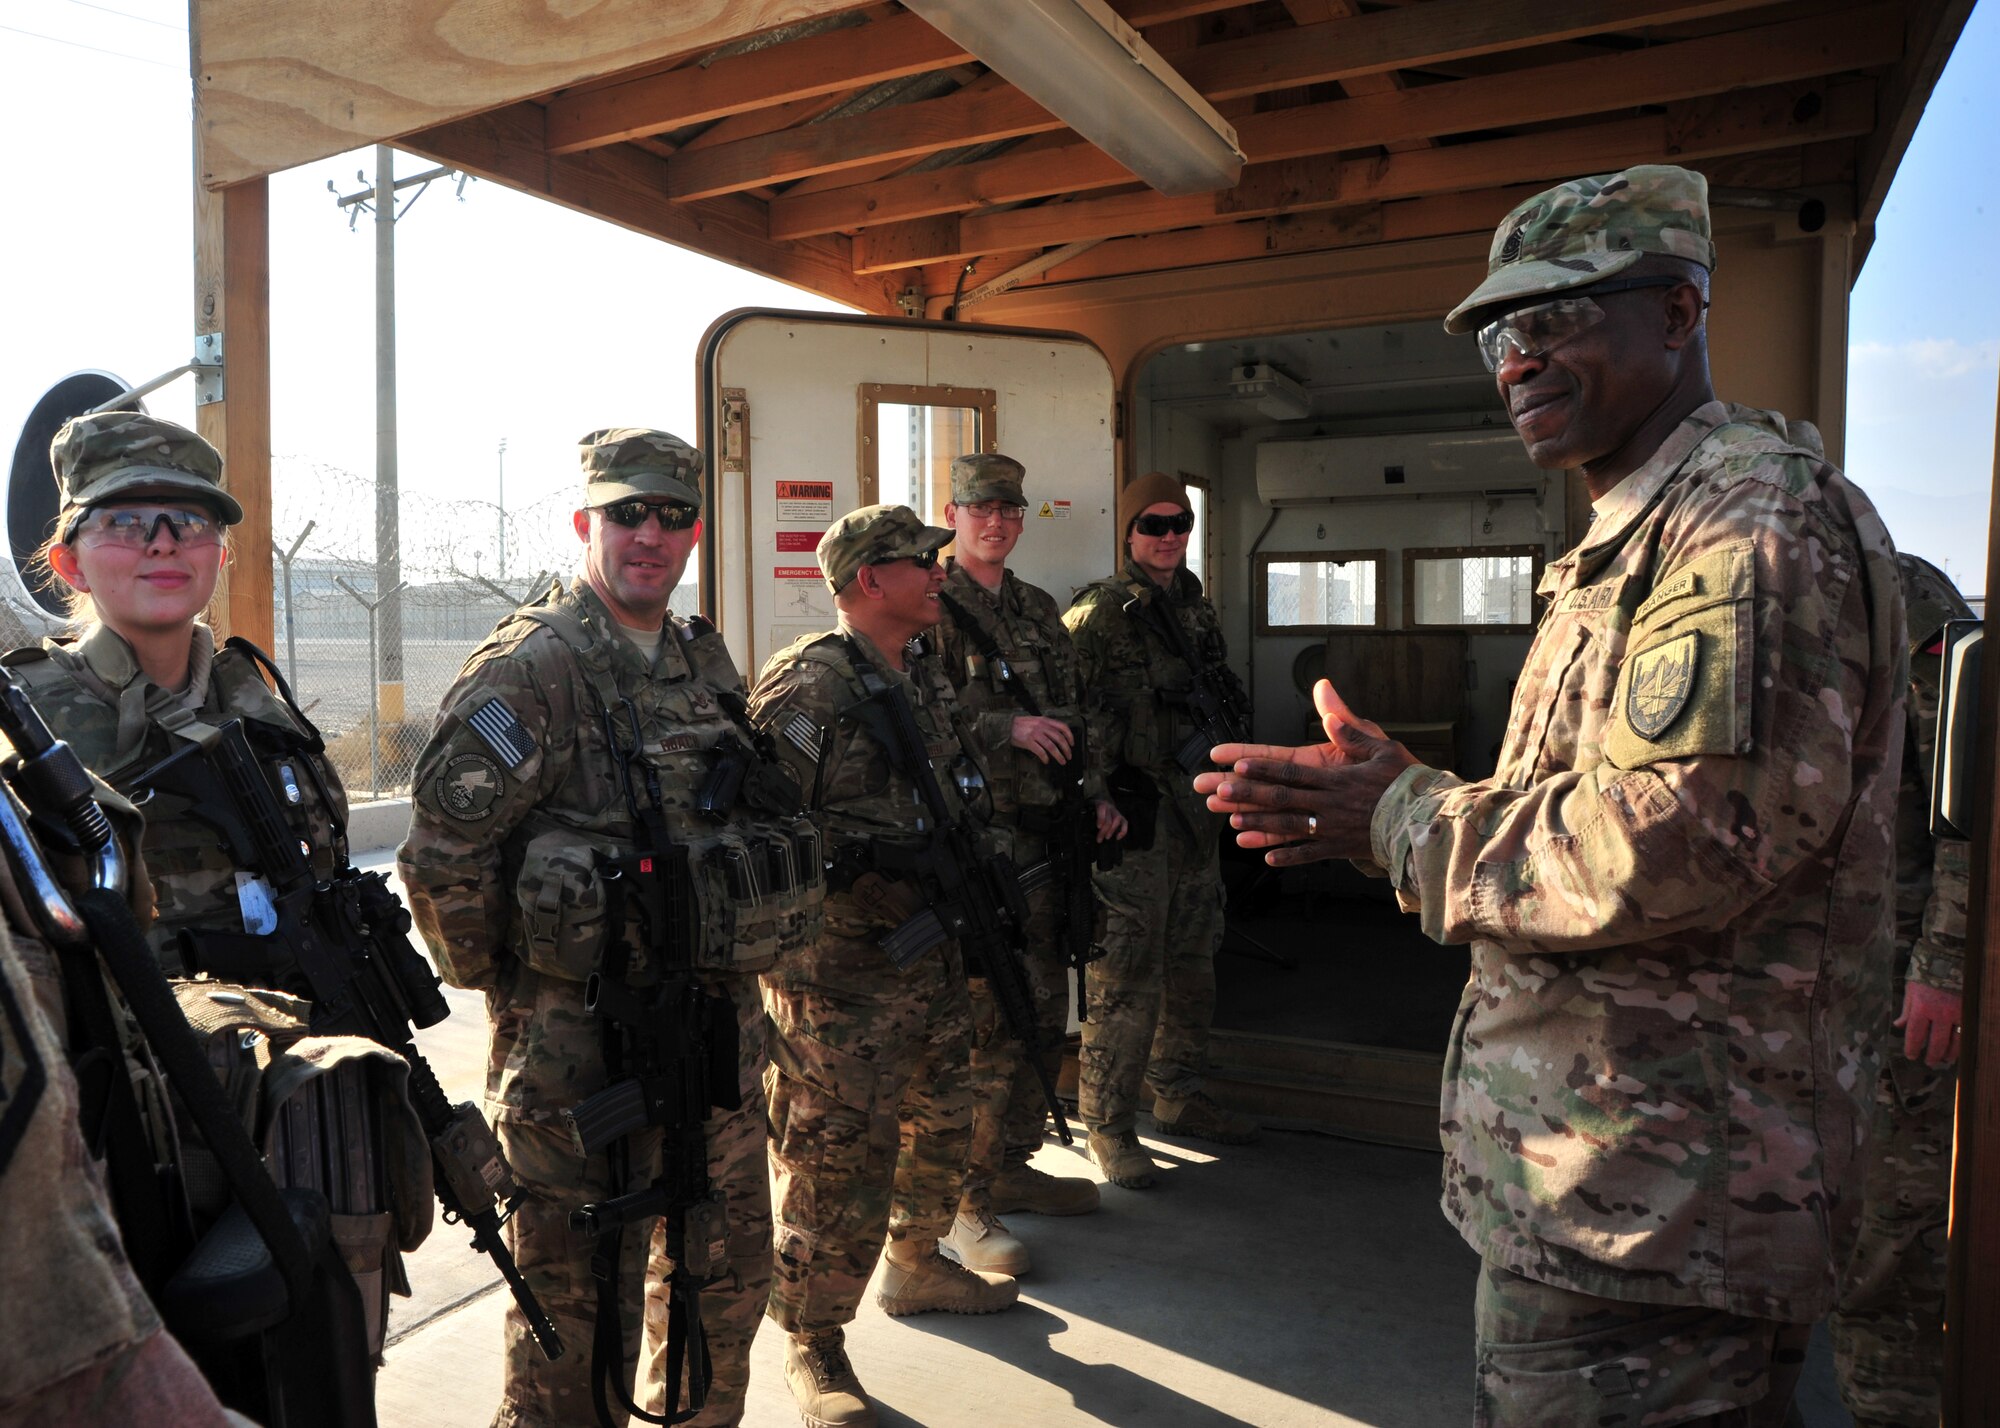 U.S. Army Command Sgt. Maj. Christopher Gilpin, Combined Joint Task Force 3 United States Forces Afghanistan, meets with defenders during a tour Jan. 6, 2015 at Bagram Airfield, Afghanistan. During the tour, Gilpin had the opportunity to meet with 455th Air Expeditionary Wing leadership and become better acquainted with Air Force assets and squadrons. (U.S. Air Force photo by Staff Sgt. Whitney Amstutz/released)